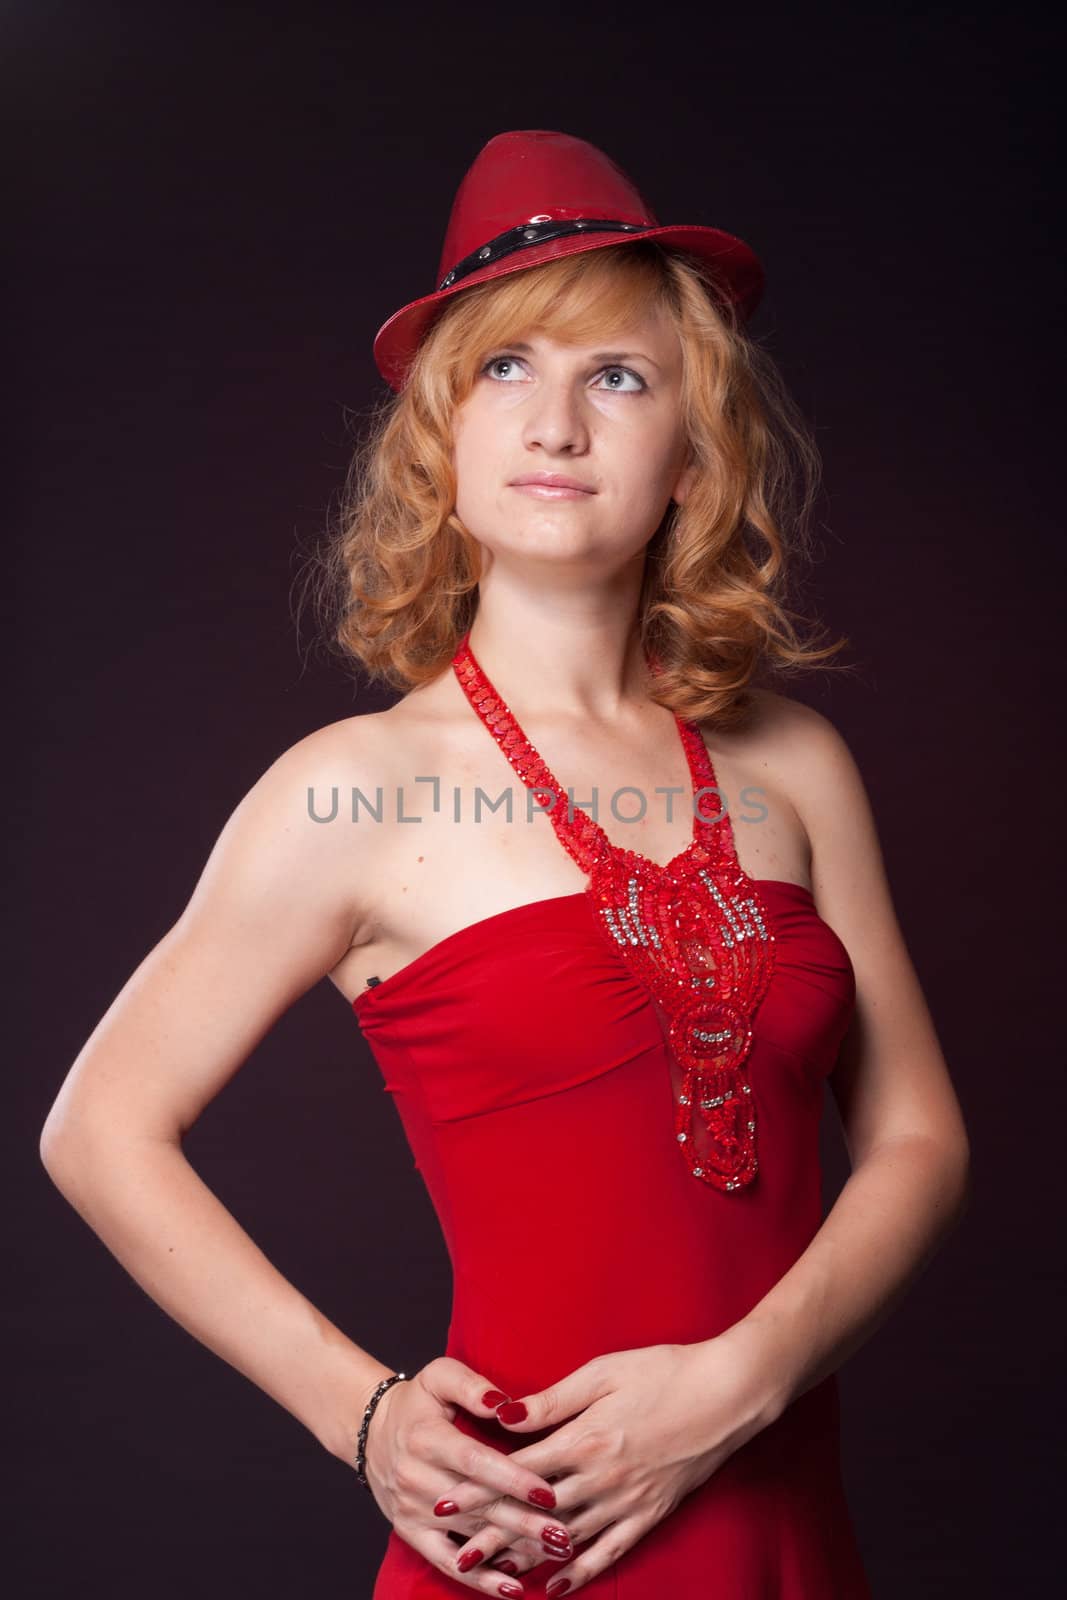 Red-haired girl in a red dress and red hat by victosha